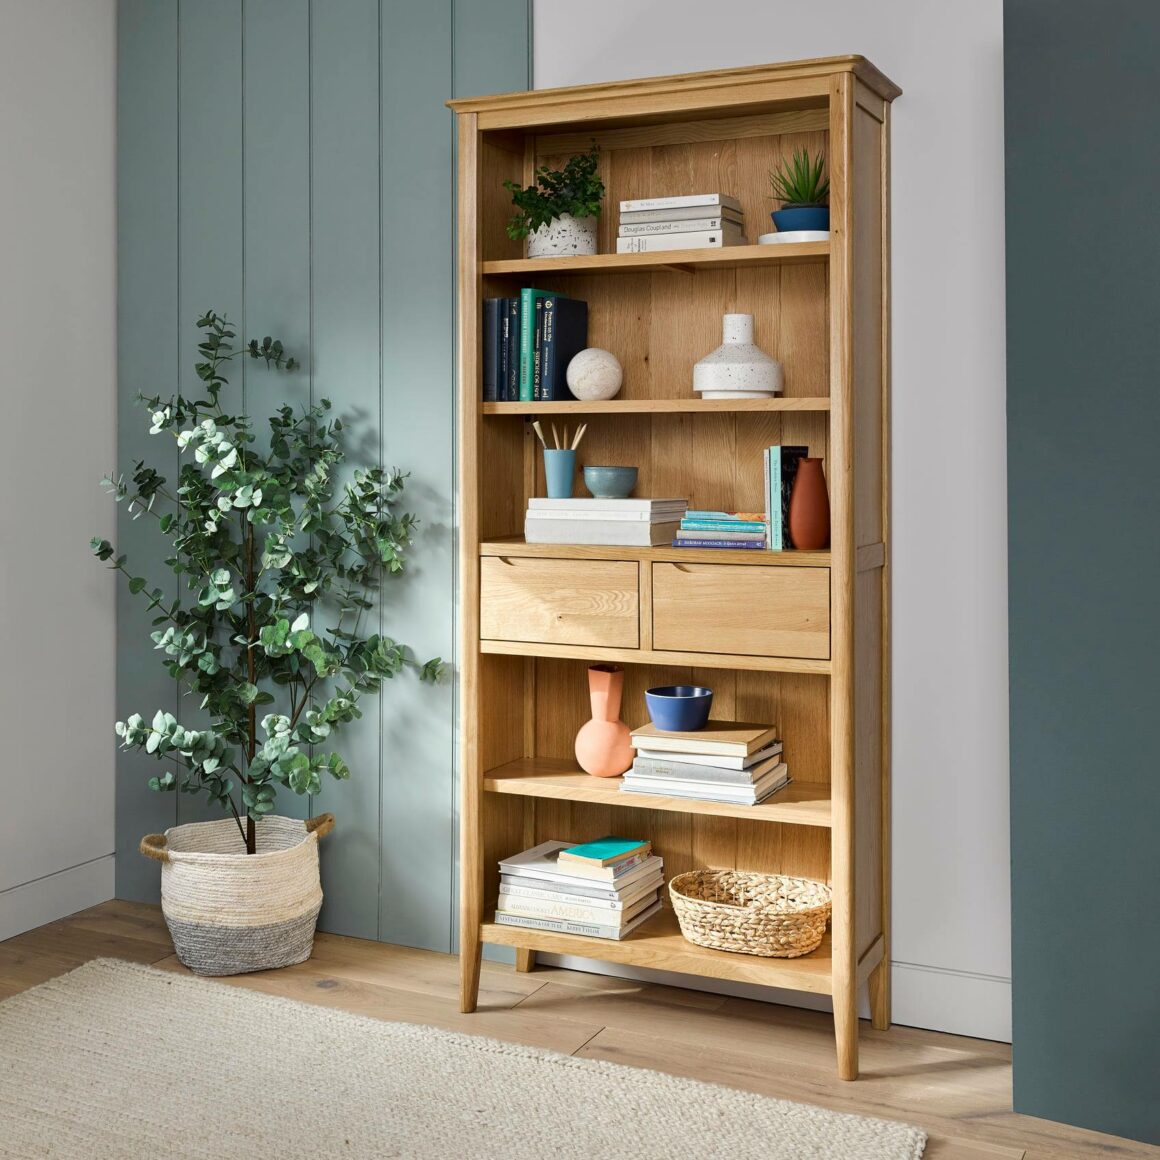 Bookcase ideas for different rooms | The Oak Furnitureland Blog